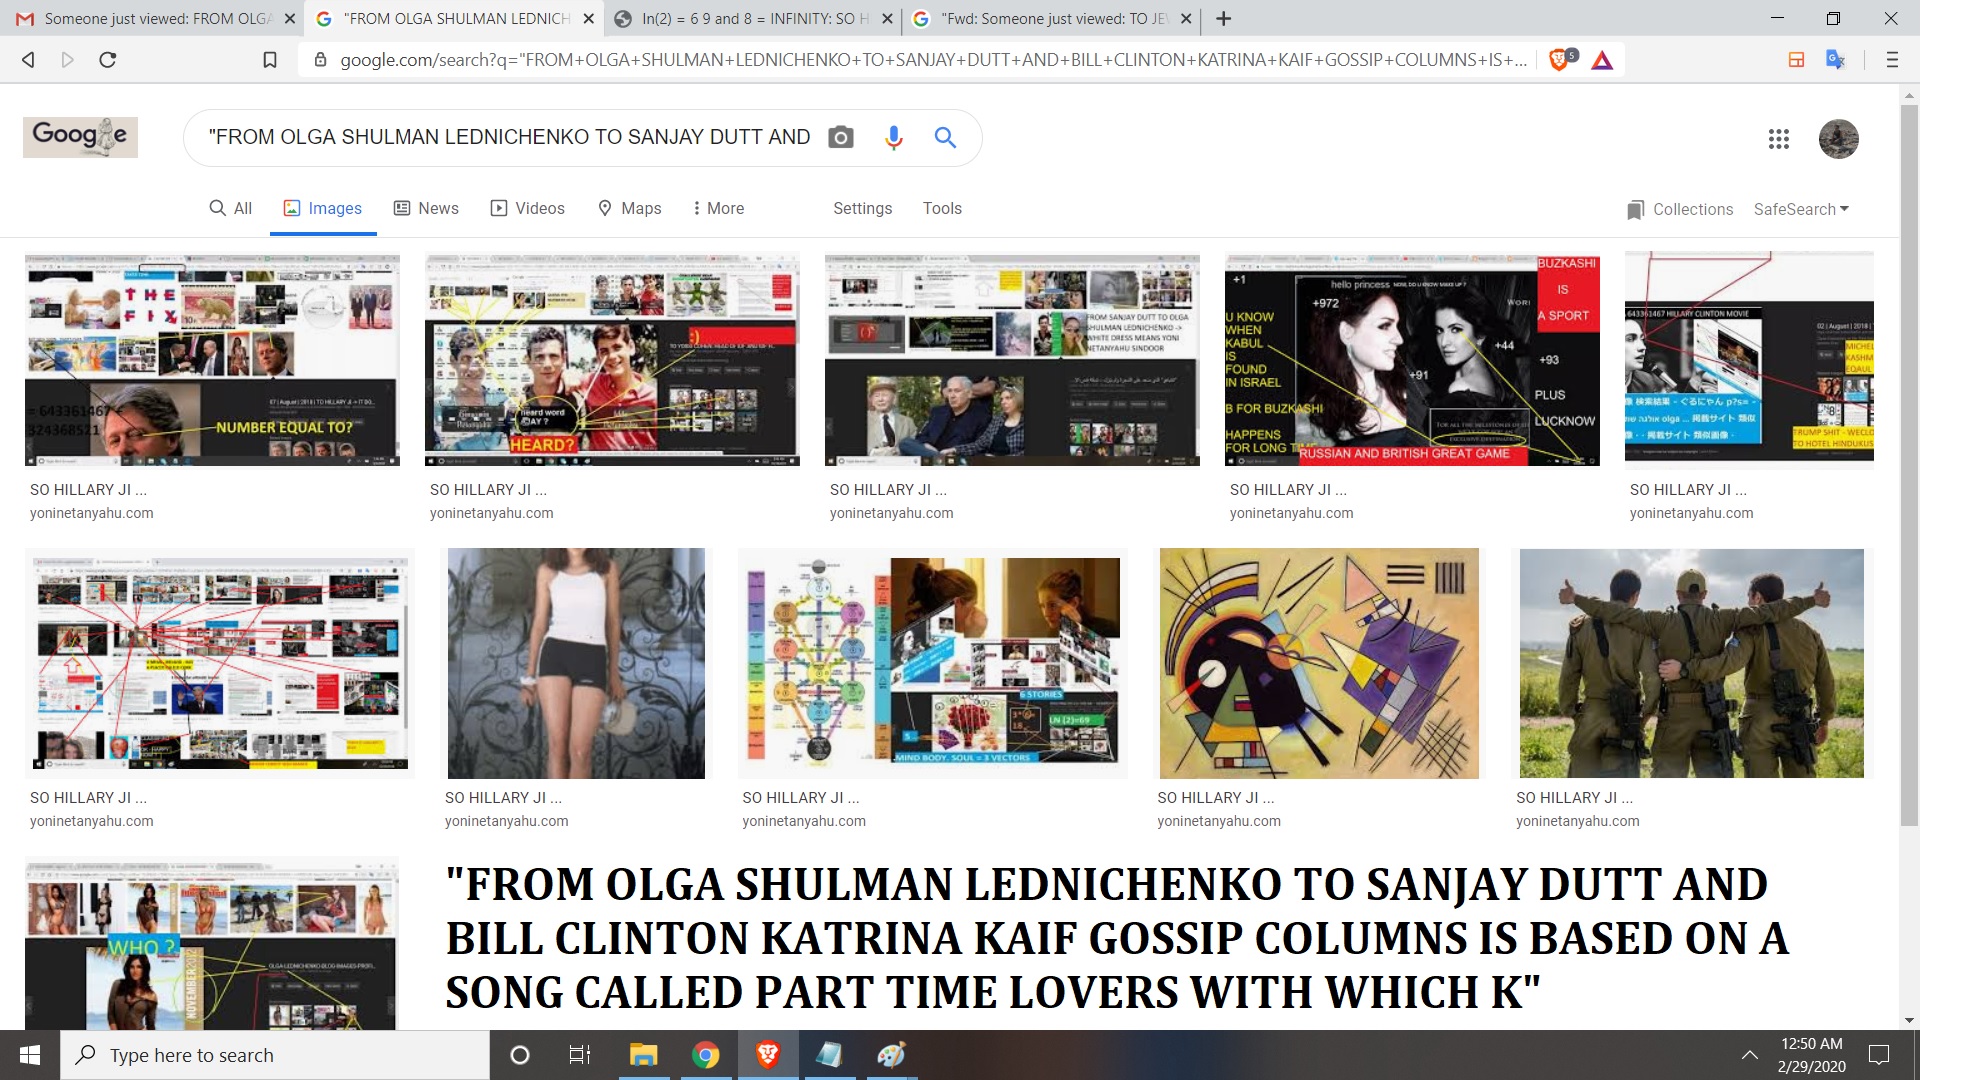 FROM OLGA SHULMAN LEDNICHENKO TO SANJAY DUTT AND BILL CLINTON KATRINA KAIF GOSSIP COLUMNS IS BASED ON A SONG CALLED PART TIME LOVERS WITH WHICH K